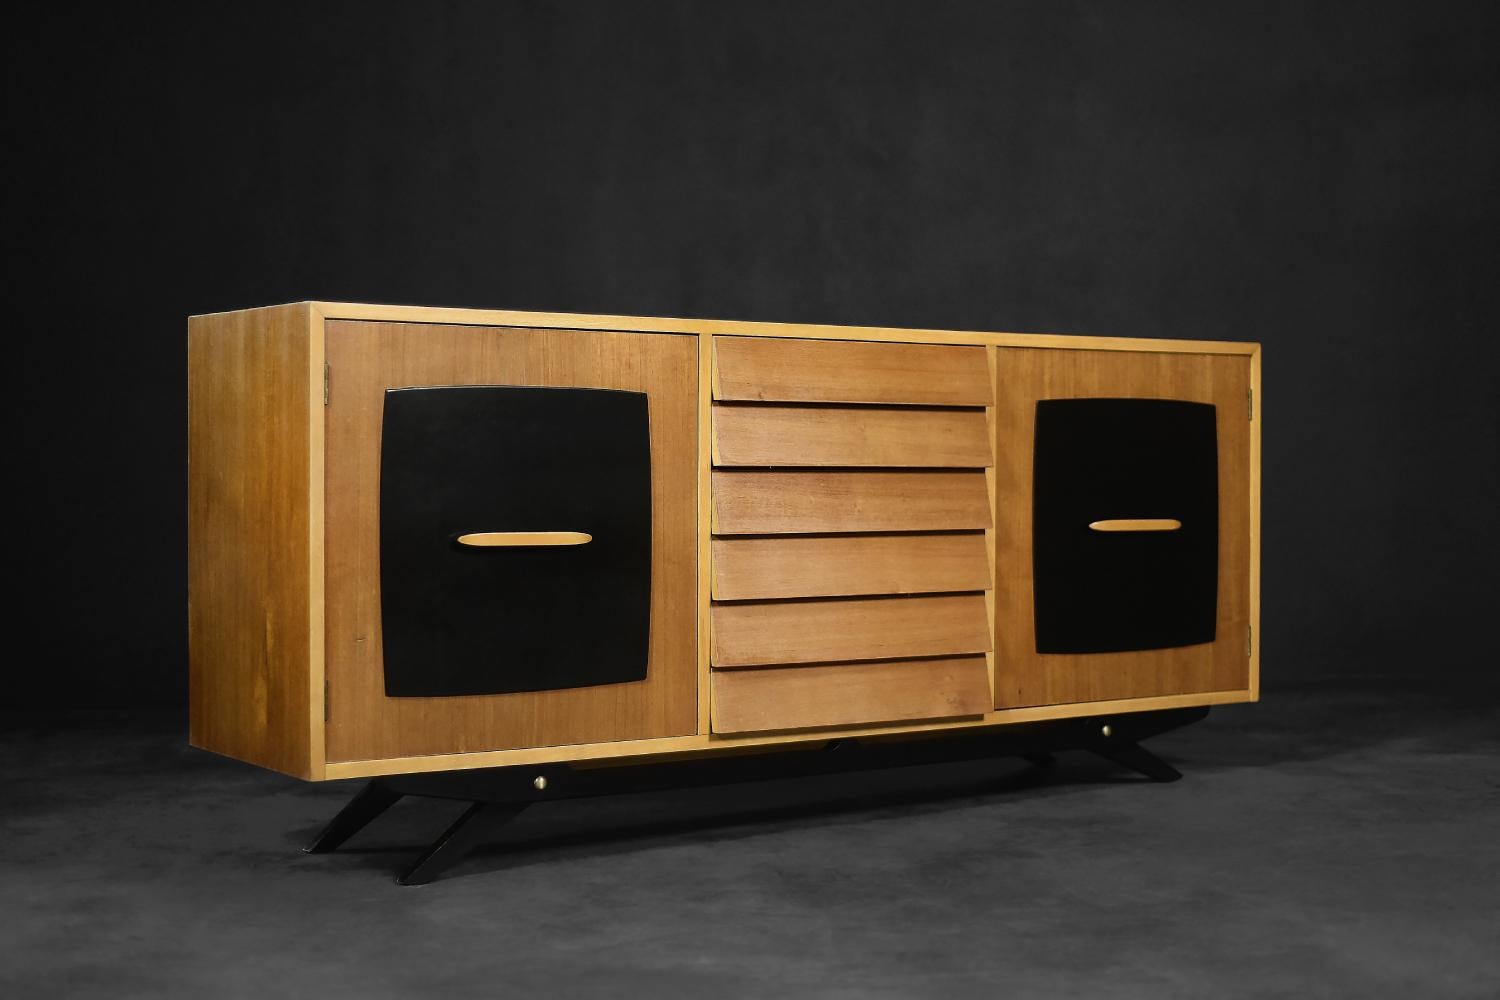 This modernist sideboard was designed by Gillis Lundgren for the Swedish company IKEA in 1955. The piece of furniture is part of the Forum series, which appeared in the company's catalog in 1956. The sideboard is made of teak wood in a warm shade of